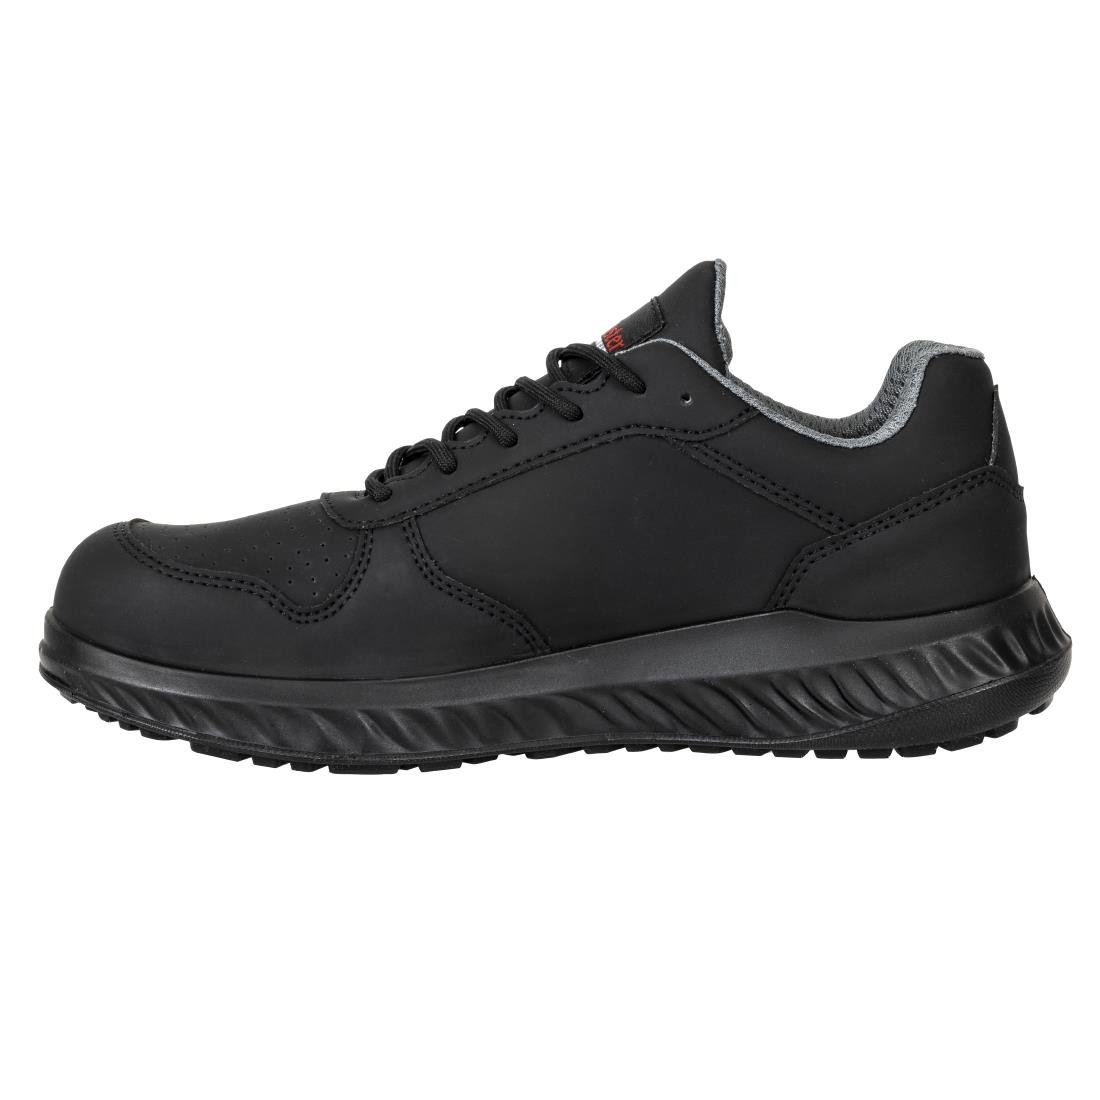 BA063-45 Slipbuster Recycled Microfibre Trainers Matte Black 45 JD Catering Equipment Solutions Ltd